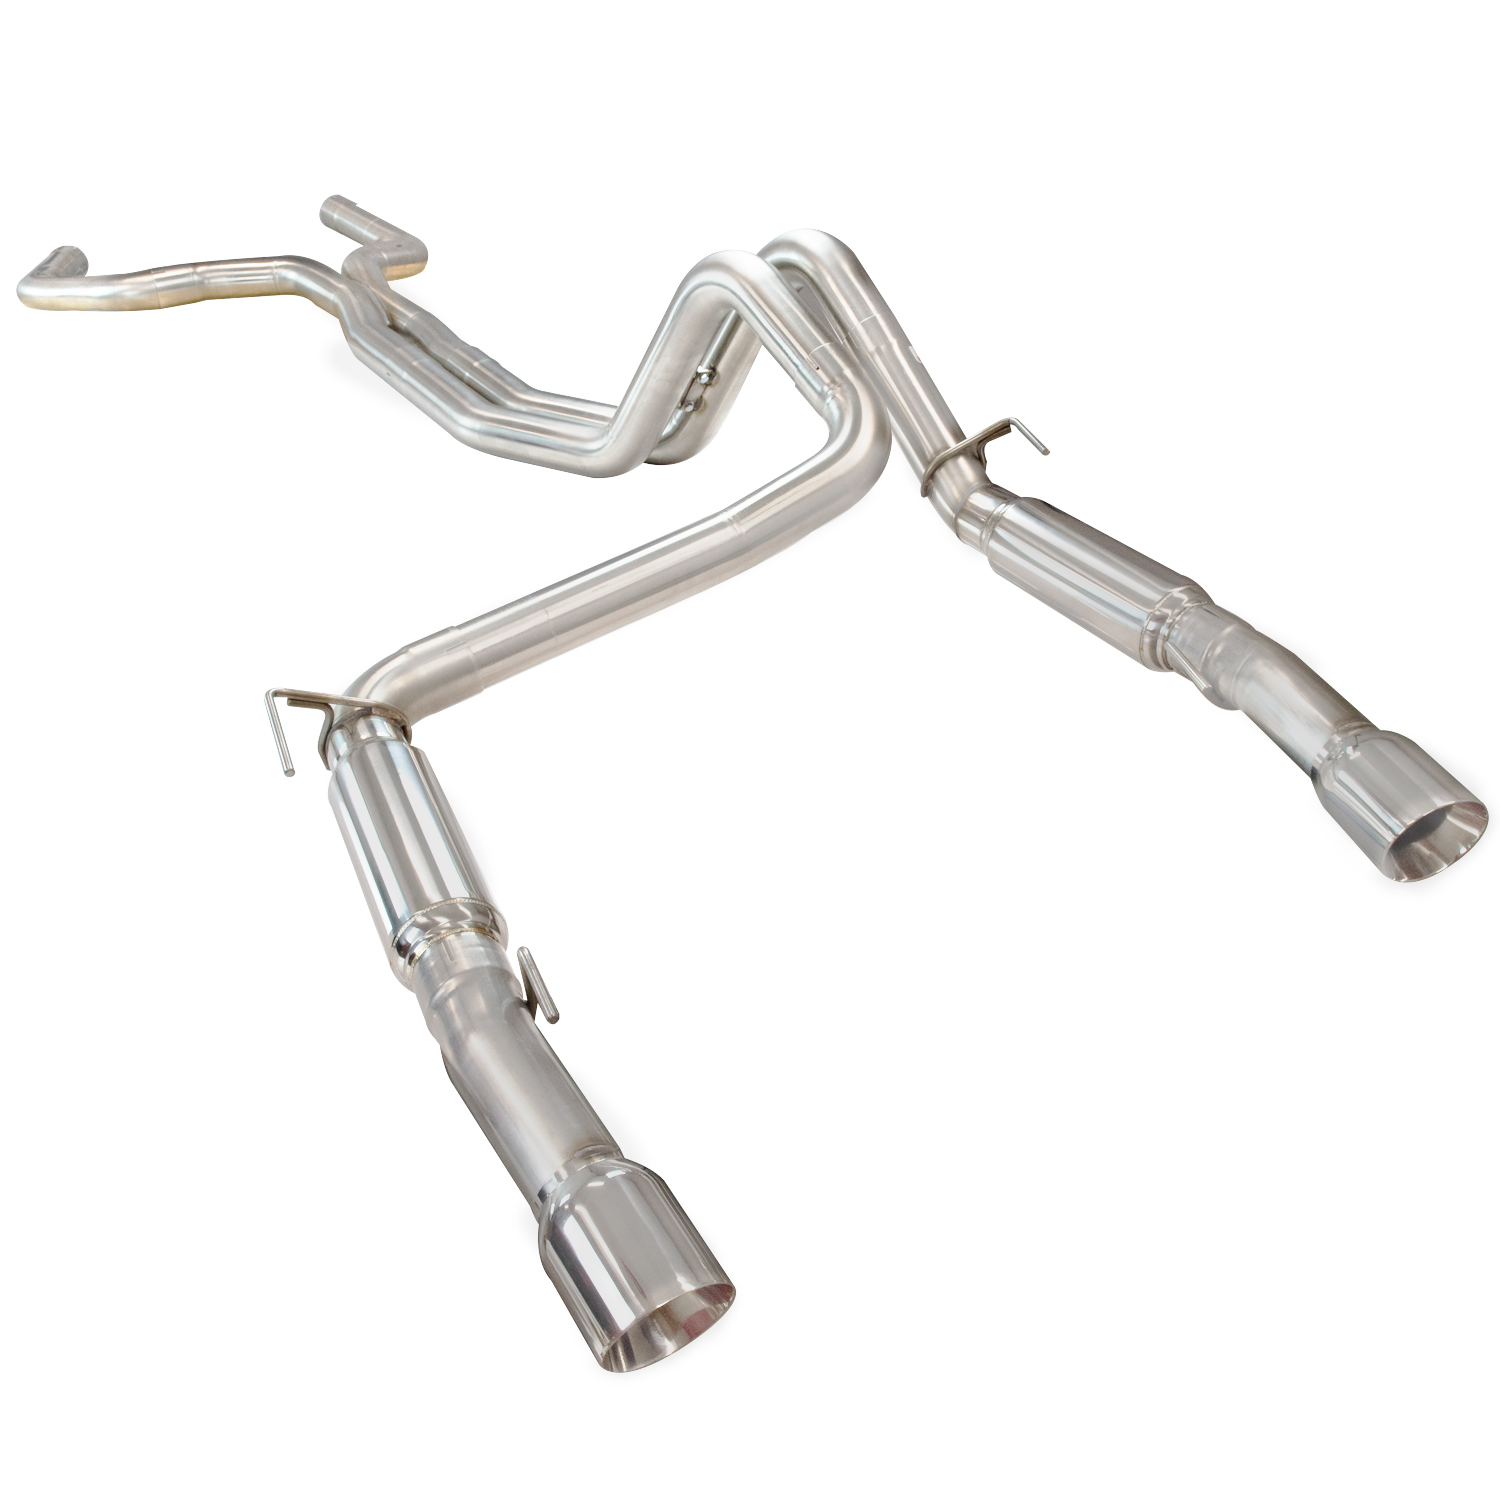 True Dual Exhaust System 3" Catted Incl. 3 xPipe w/Pol. RaceMufflers/Pol. 4" Dual Tips-Camaro